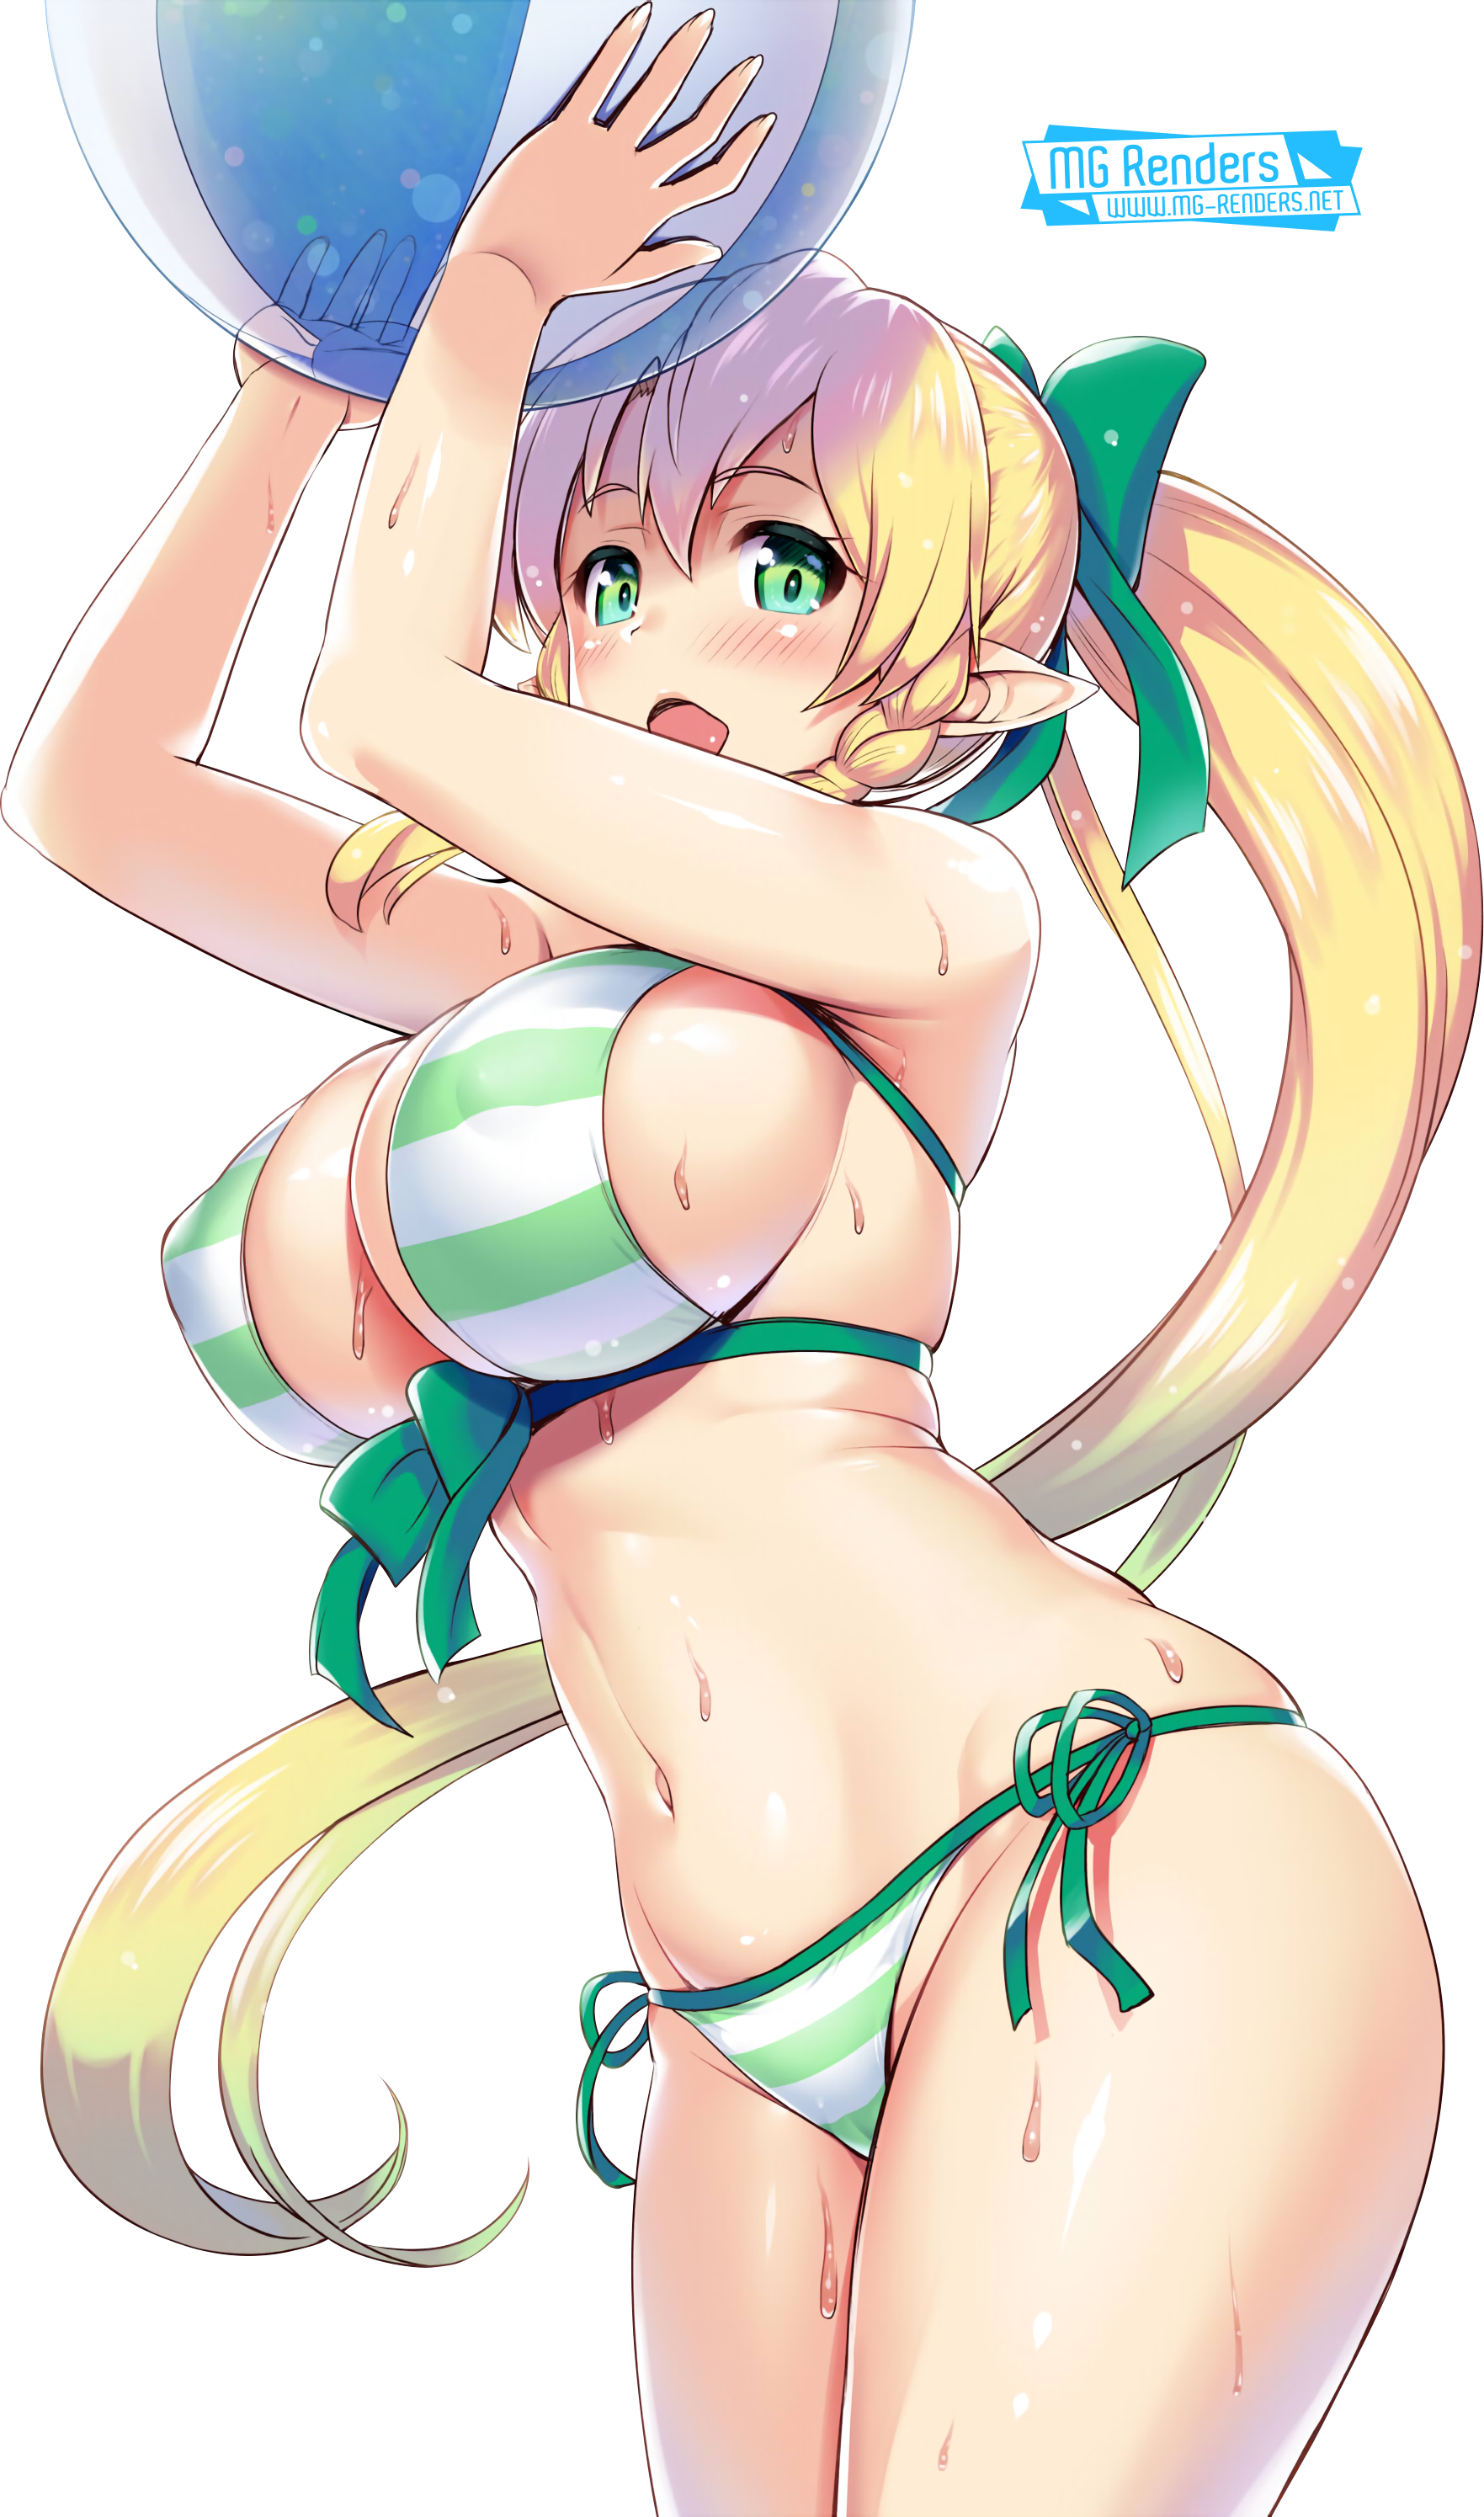 Sword Art Online Porn Boobs - Sword Art Online Leafa Render 15 Anime Png Image Without Background | Free  Hot Nude Porn Pic Gallery